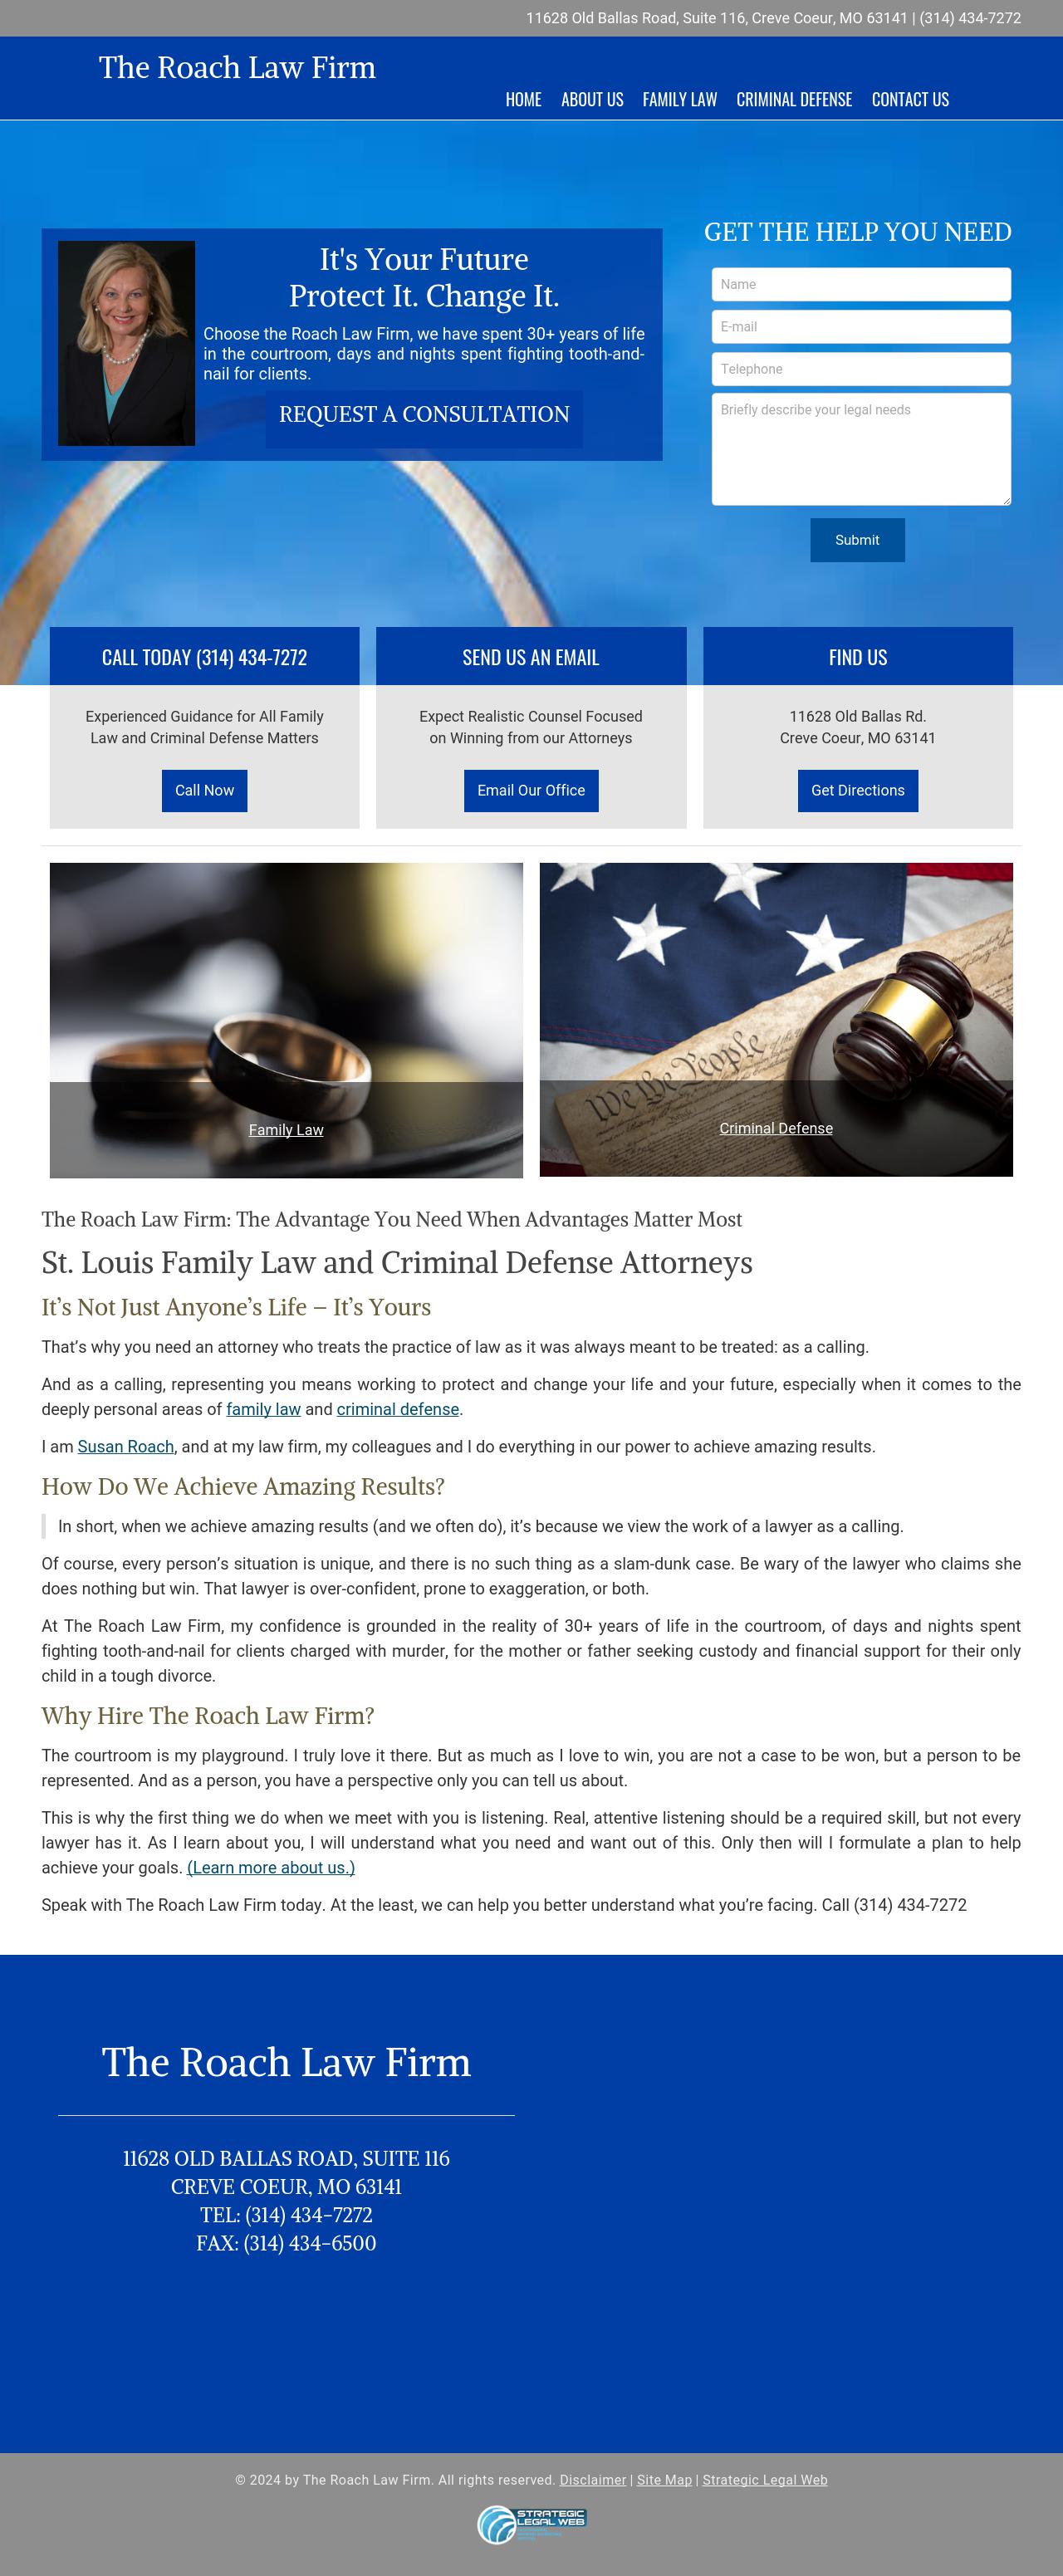 The Roach Law Firm - Clayton MO Lawyers